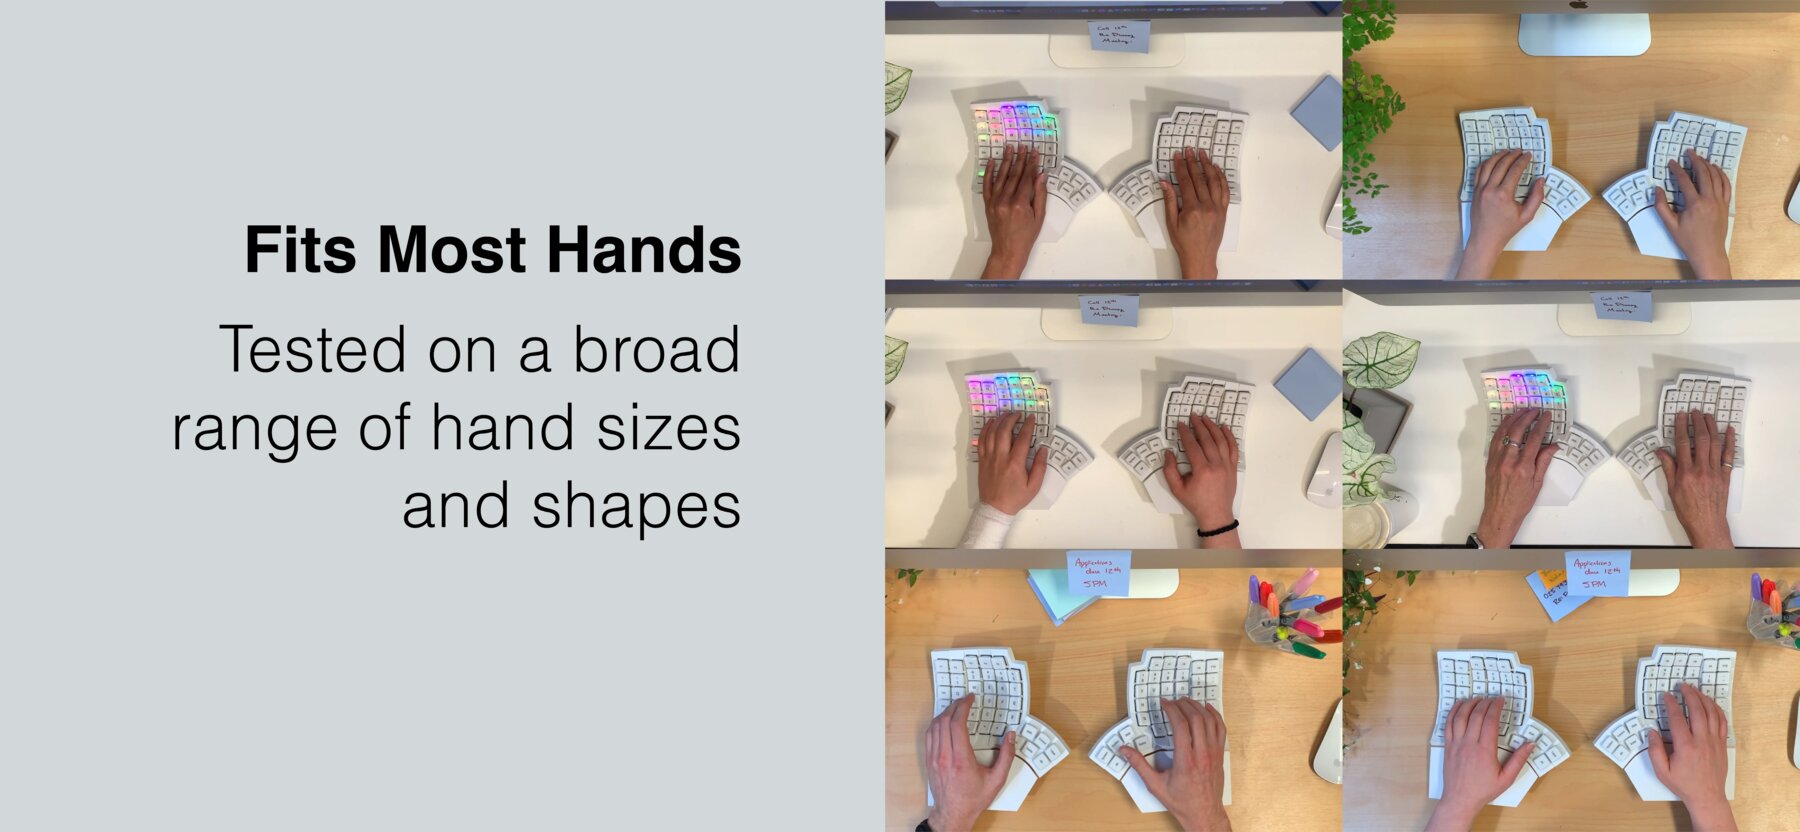 Various hand sizes shown ergonomically fitting when using the Glove80 keyboard